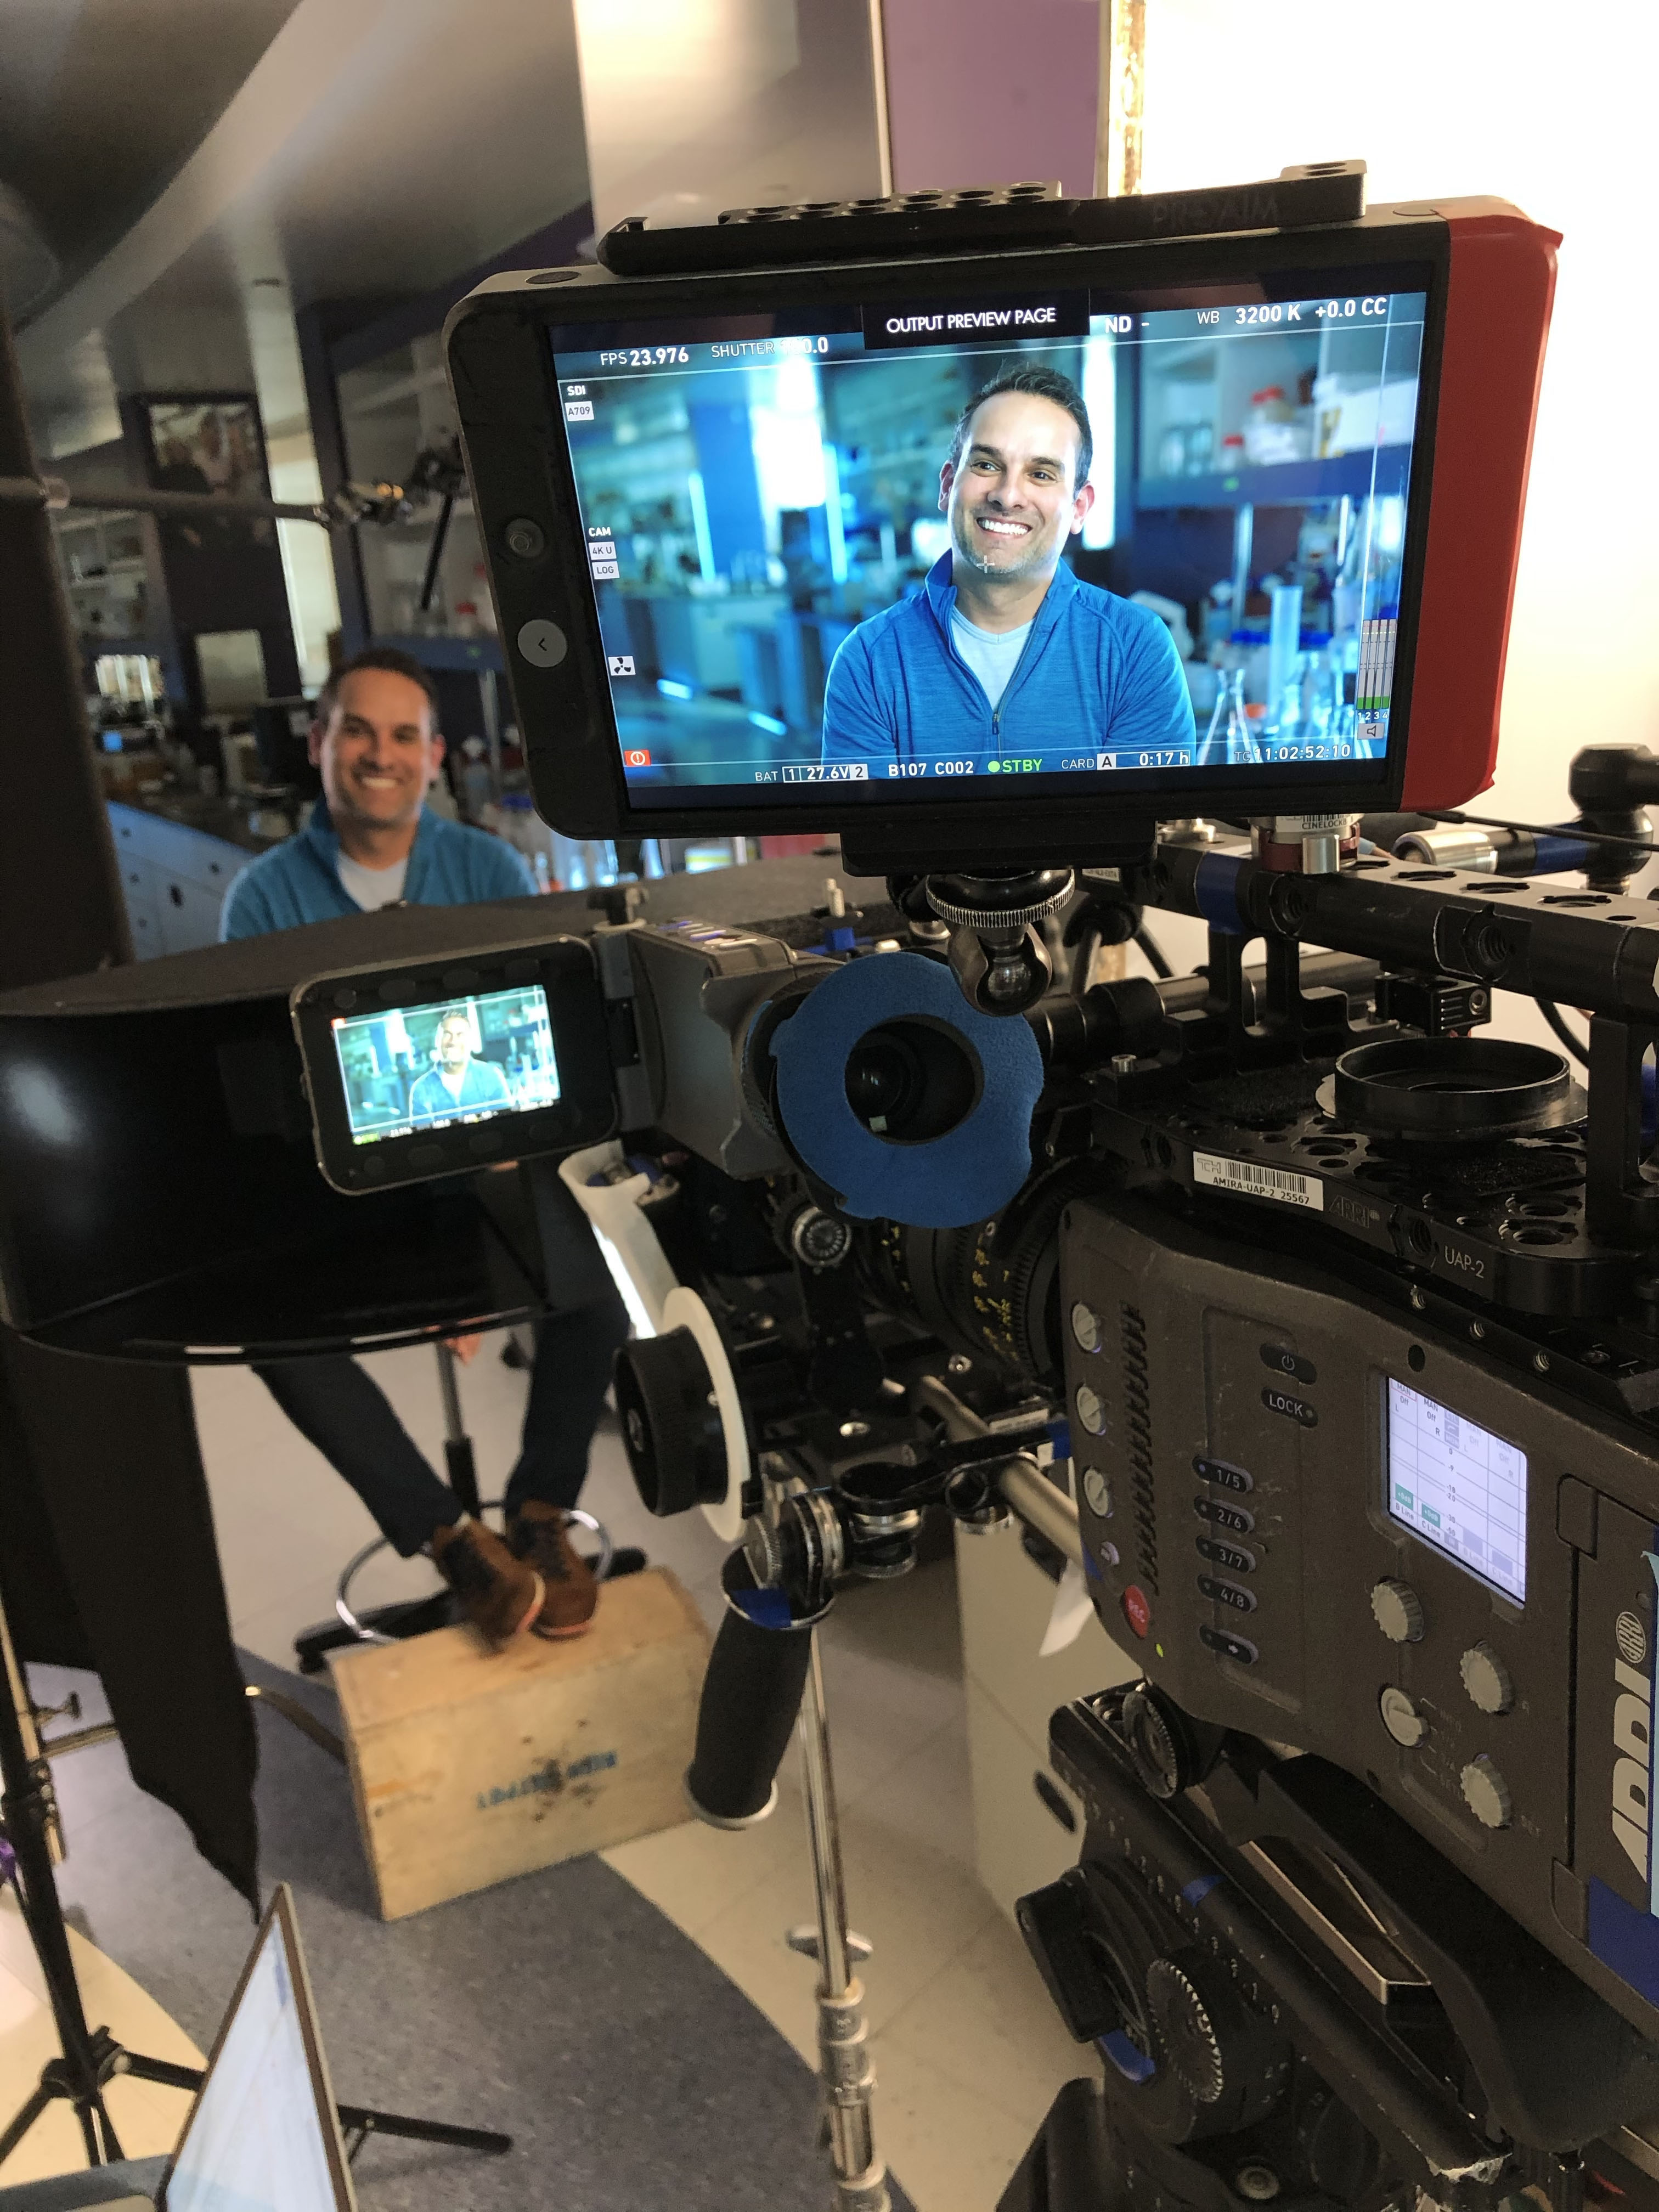 ALS TDI Collaboration with Google’s Project Euphonia Highlighted in Documentary Series Featuring Former NFL Player Tim Shaw “The Age of A.I.” Hosted by Robert Downey Jr.